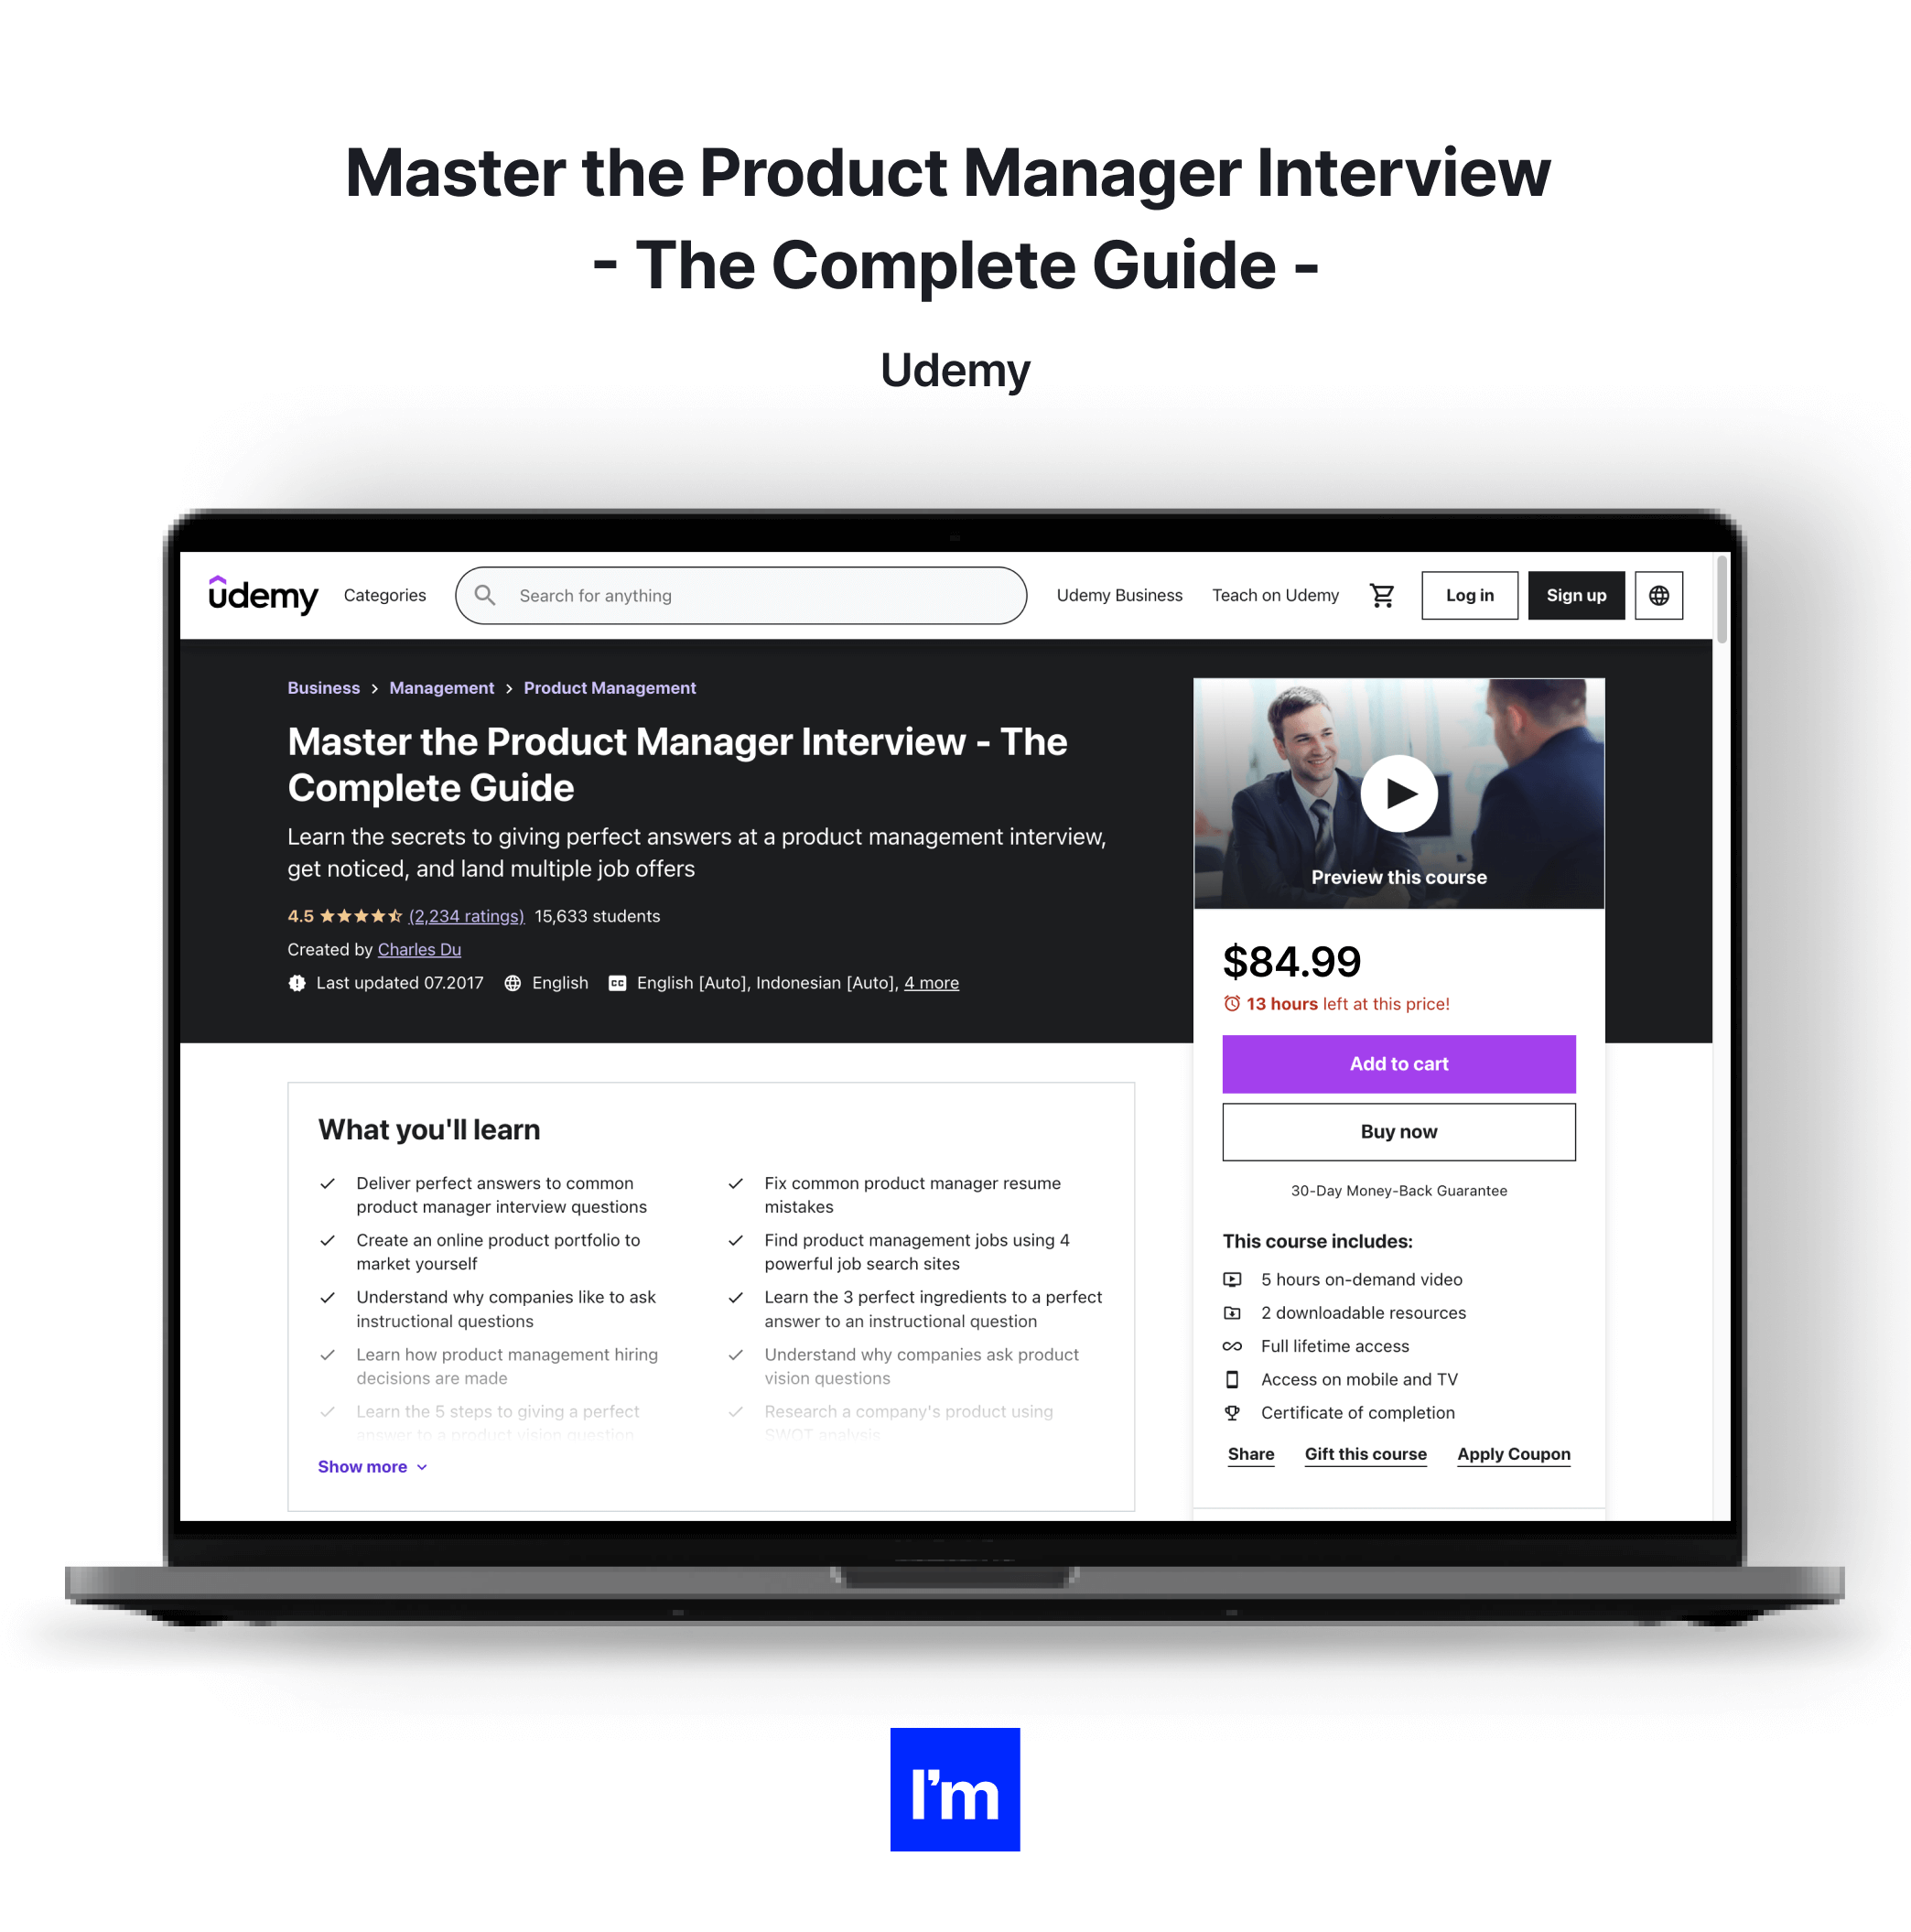 Top 10 Product Management Certification Programs - Master the Product Manager Interview